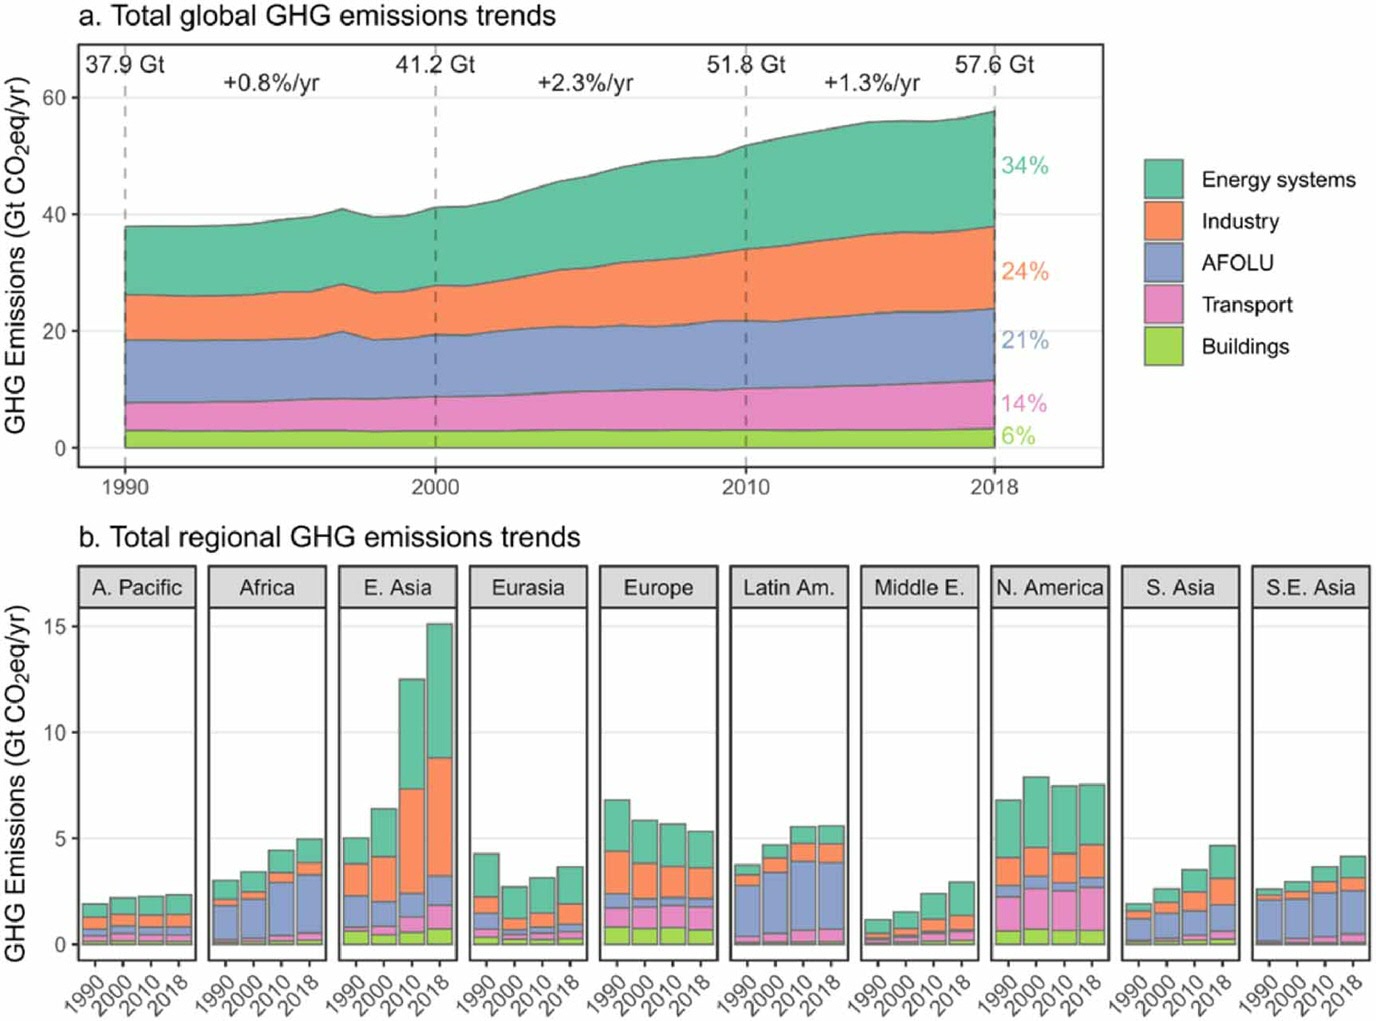 Figure 1. Global and regional GHG emissions trends for all sectors. Panel (a) shows total global anthropogenic GHG emissions divided into major sectors. Panel (b) shows regional emission trends in the years 1990, 2000, 2010, and 2018. This figure shows the direct (scope 1) allocation of emissions to sectors.